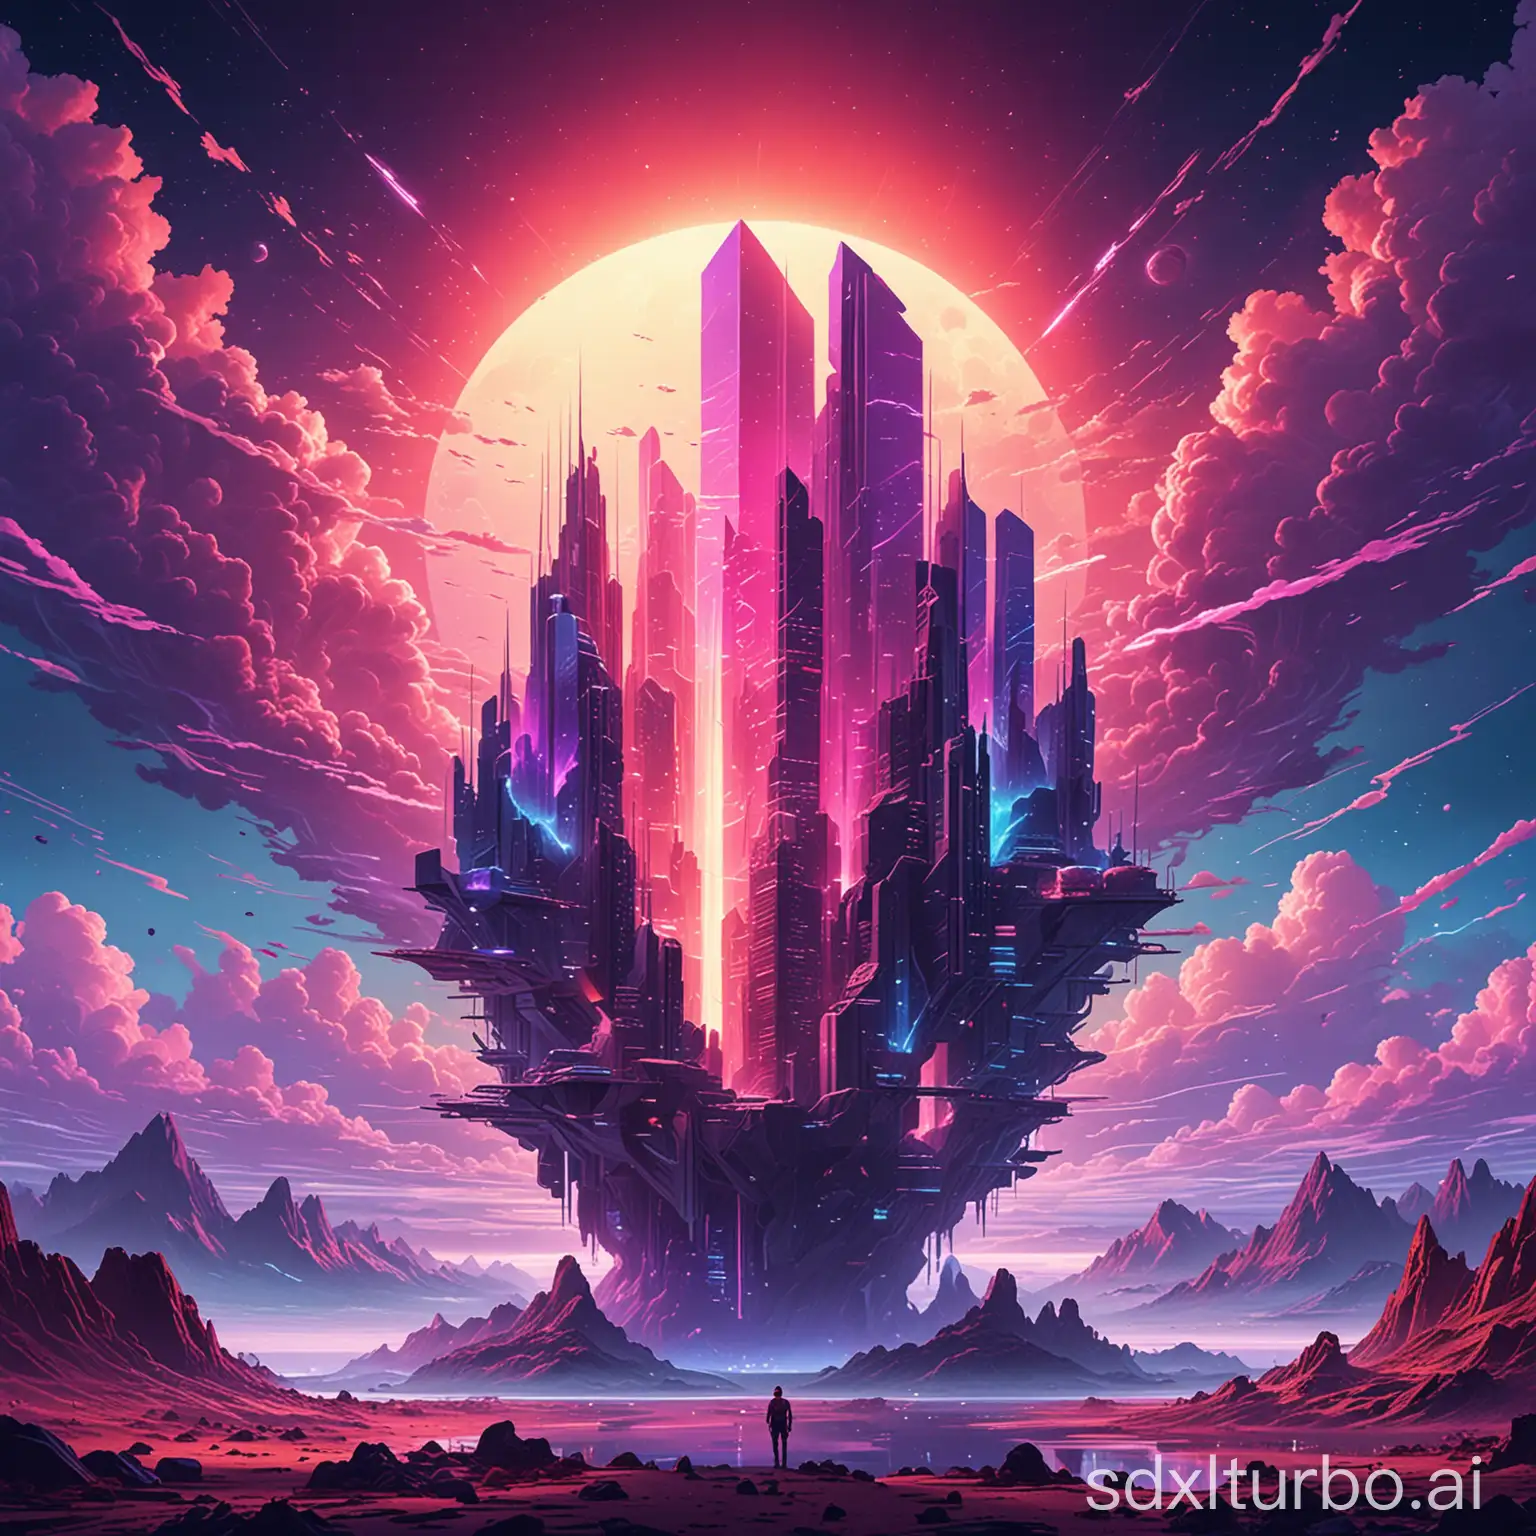 On an ethereal artificial planet of synthwave hues, the central focus is a shimmering crystalline structure rising from neon clouds, casting light in all directions. This image is a breathtaking digital painting, perfectly blending vibrant colors and dreamlike details. The geometric shapes of the structure are intricately designed, giving a sense of futuristic elegance and otherworldly beauty. Each pixel is expertly placed, creating a mesmerizing visual experience that captivates the viewer's imagination.